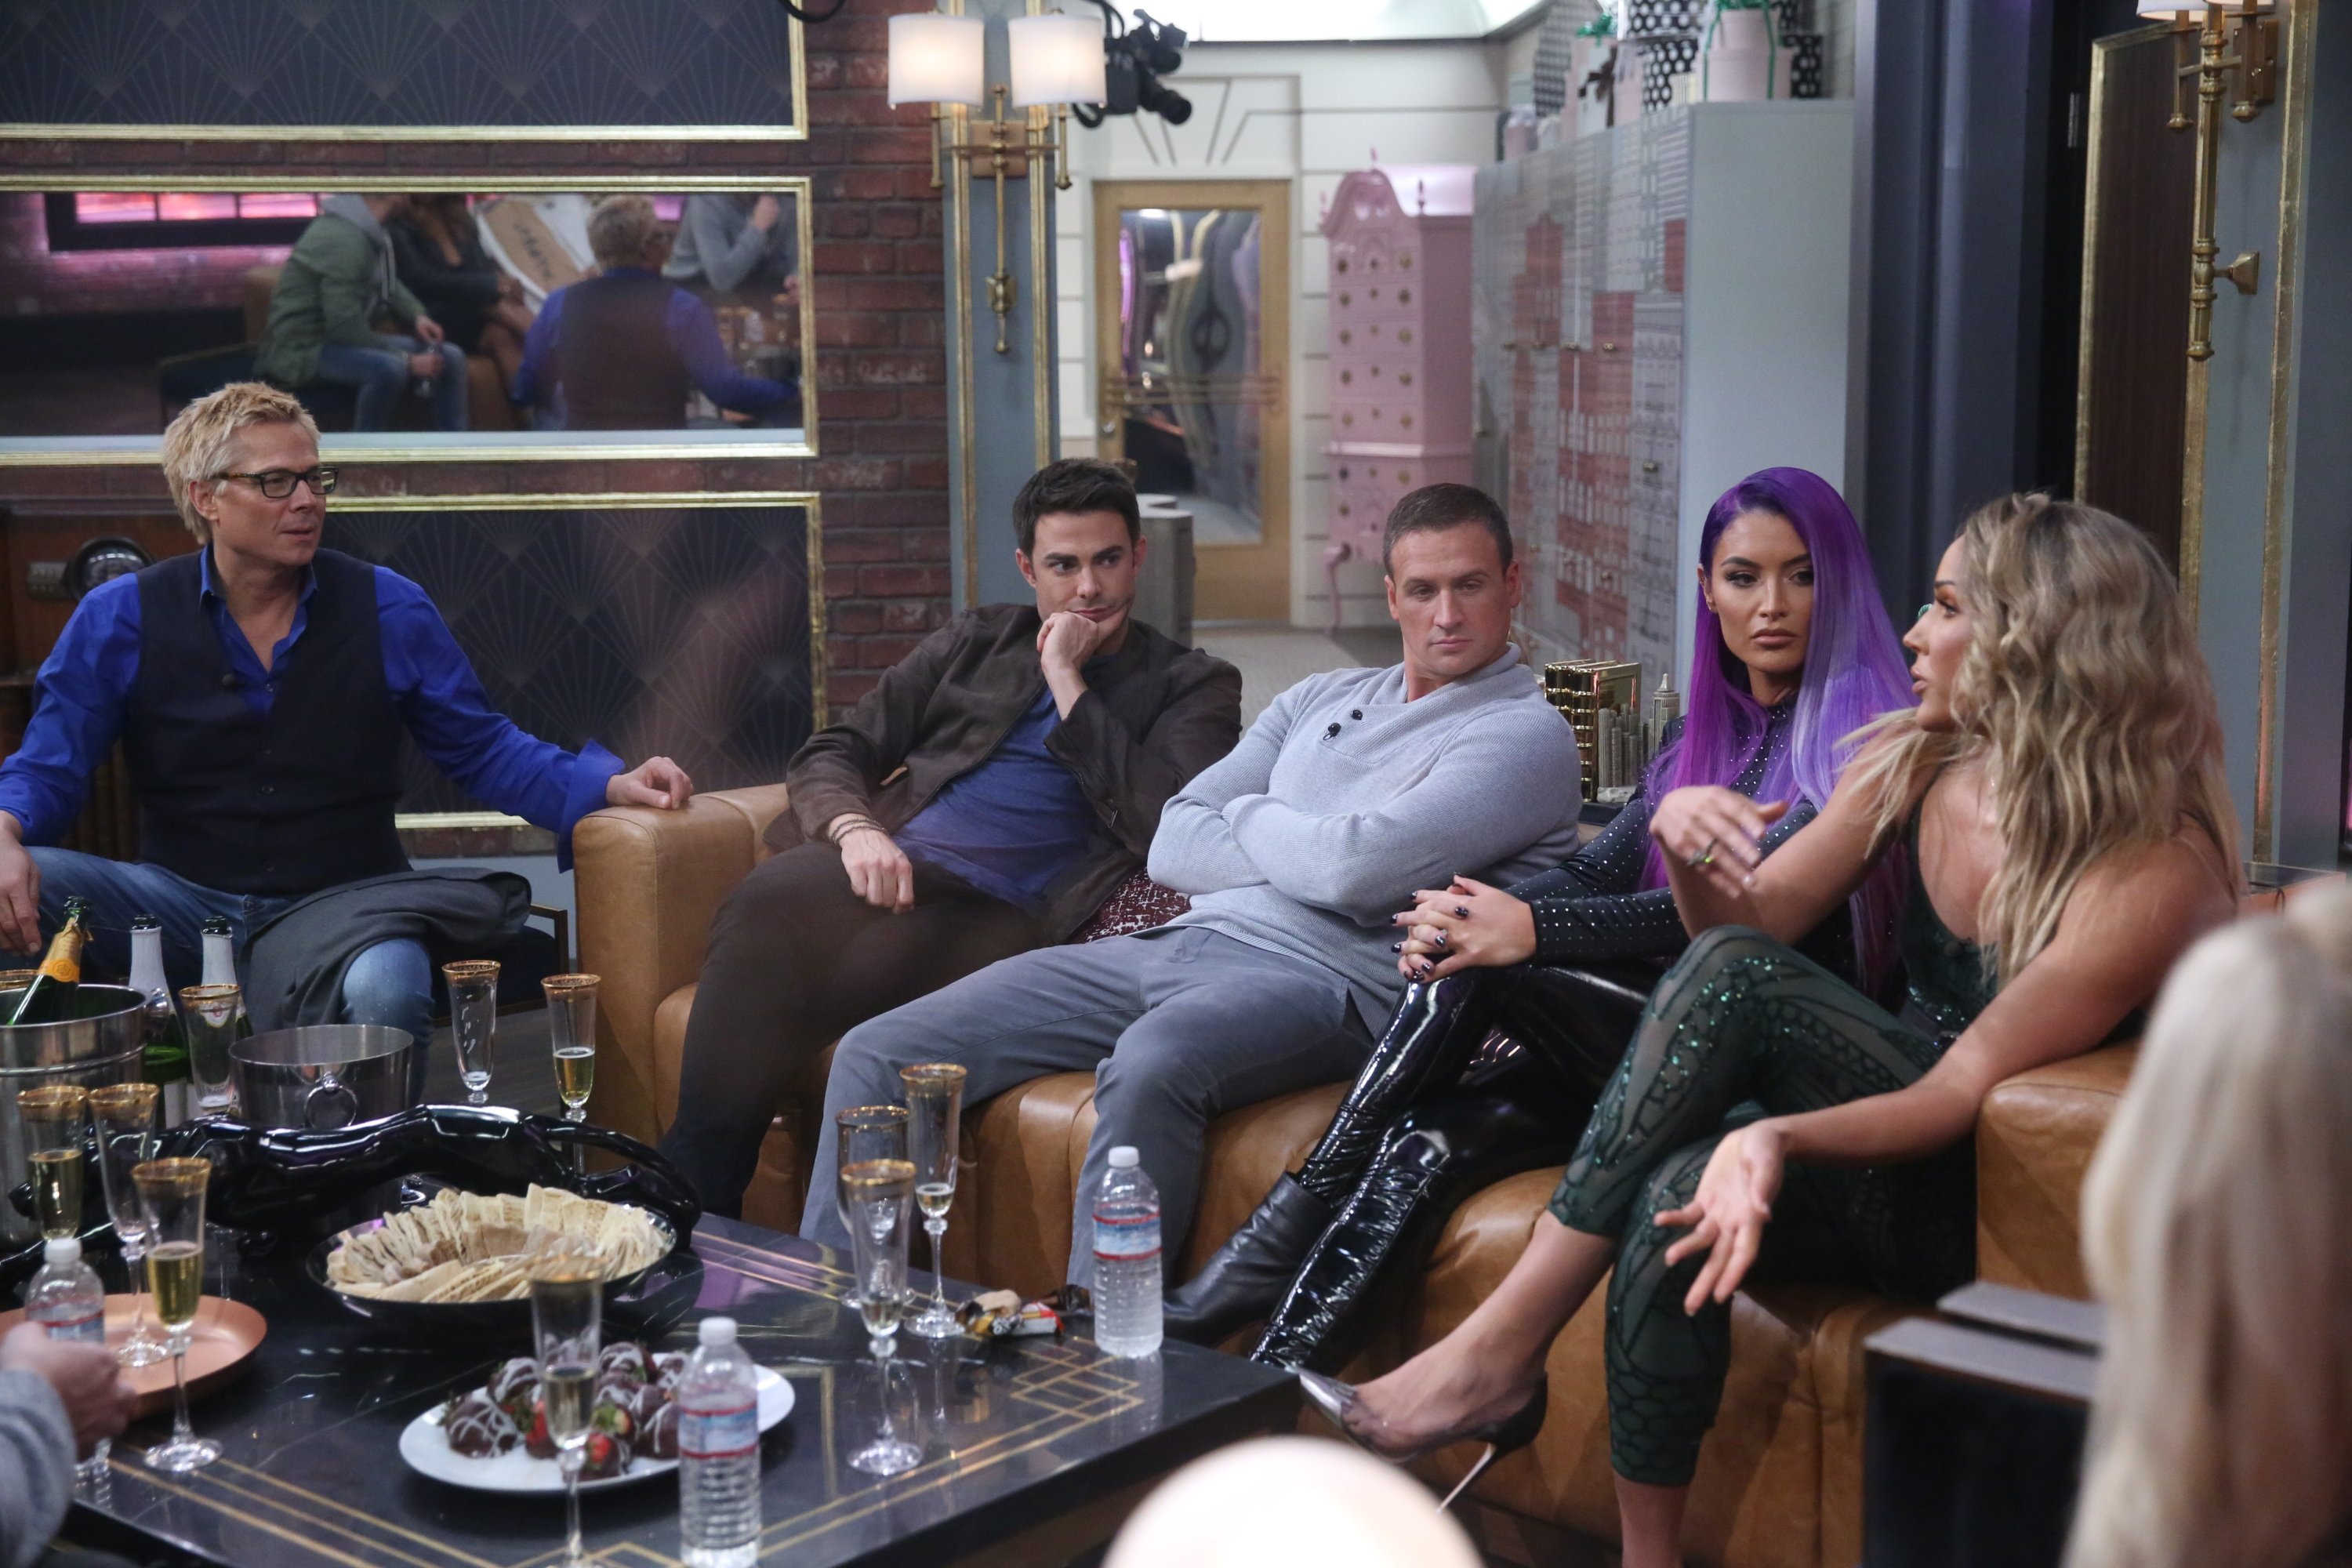 Kato Kaelin, Jonathan Bennett, Ryan Lochte, Natalie Eva Marie, and Lolo Jones sitting on a couch in the living room of 'Celebrity Big Brother'